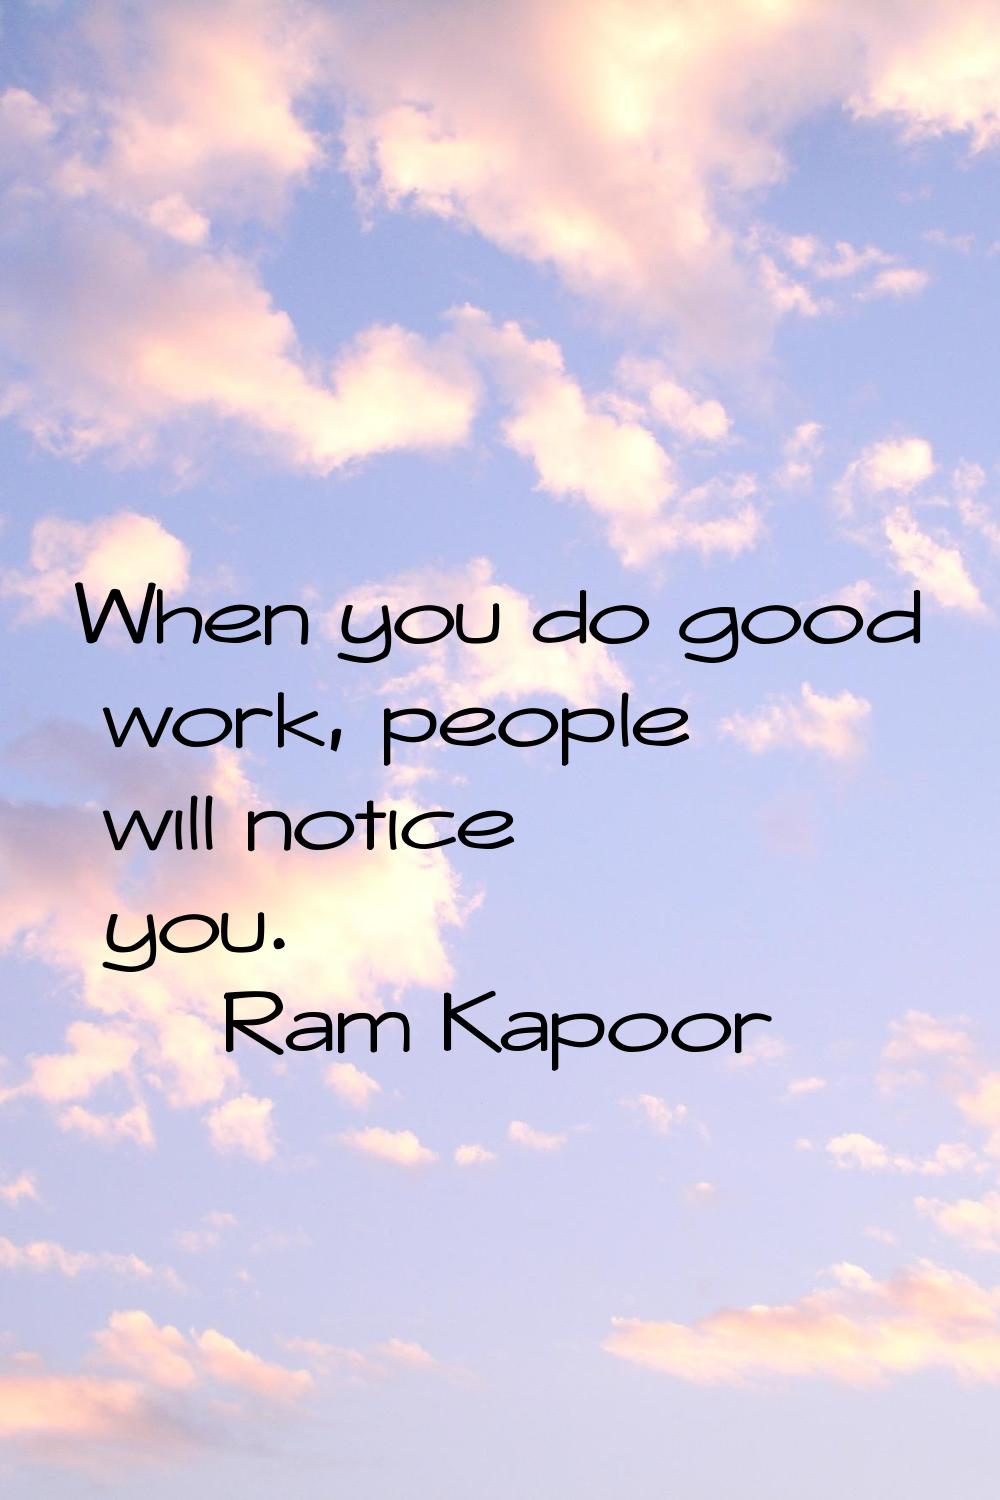 When you do good work, people will notice you.